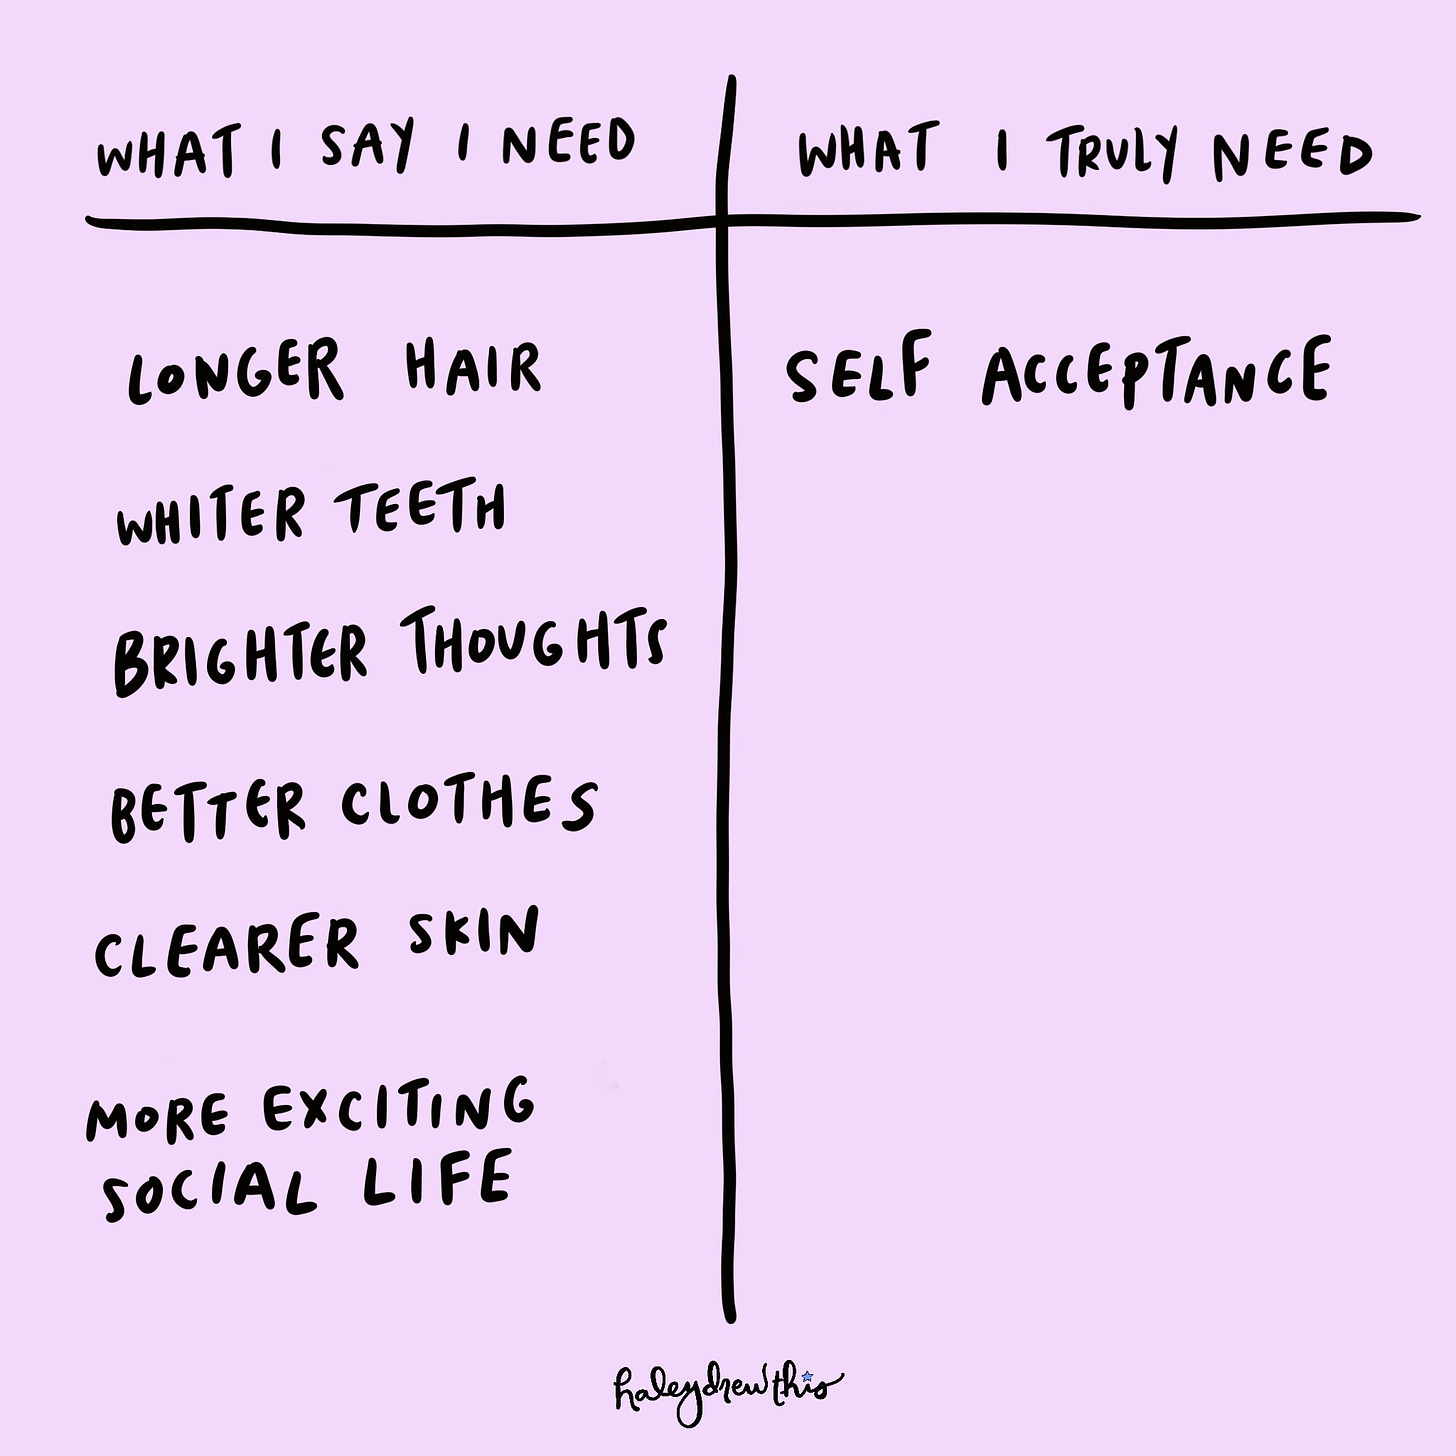 Two columns. On one side, it reads "what I say I need: Longer hair, whiter teeth, brighter thoughts, better clothes, clearer skin, more exciting social life" while the second column reads "what I actually need: self acceptance"